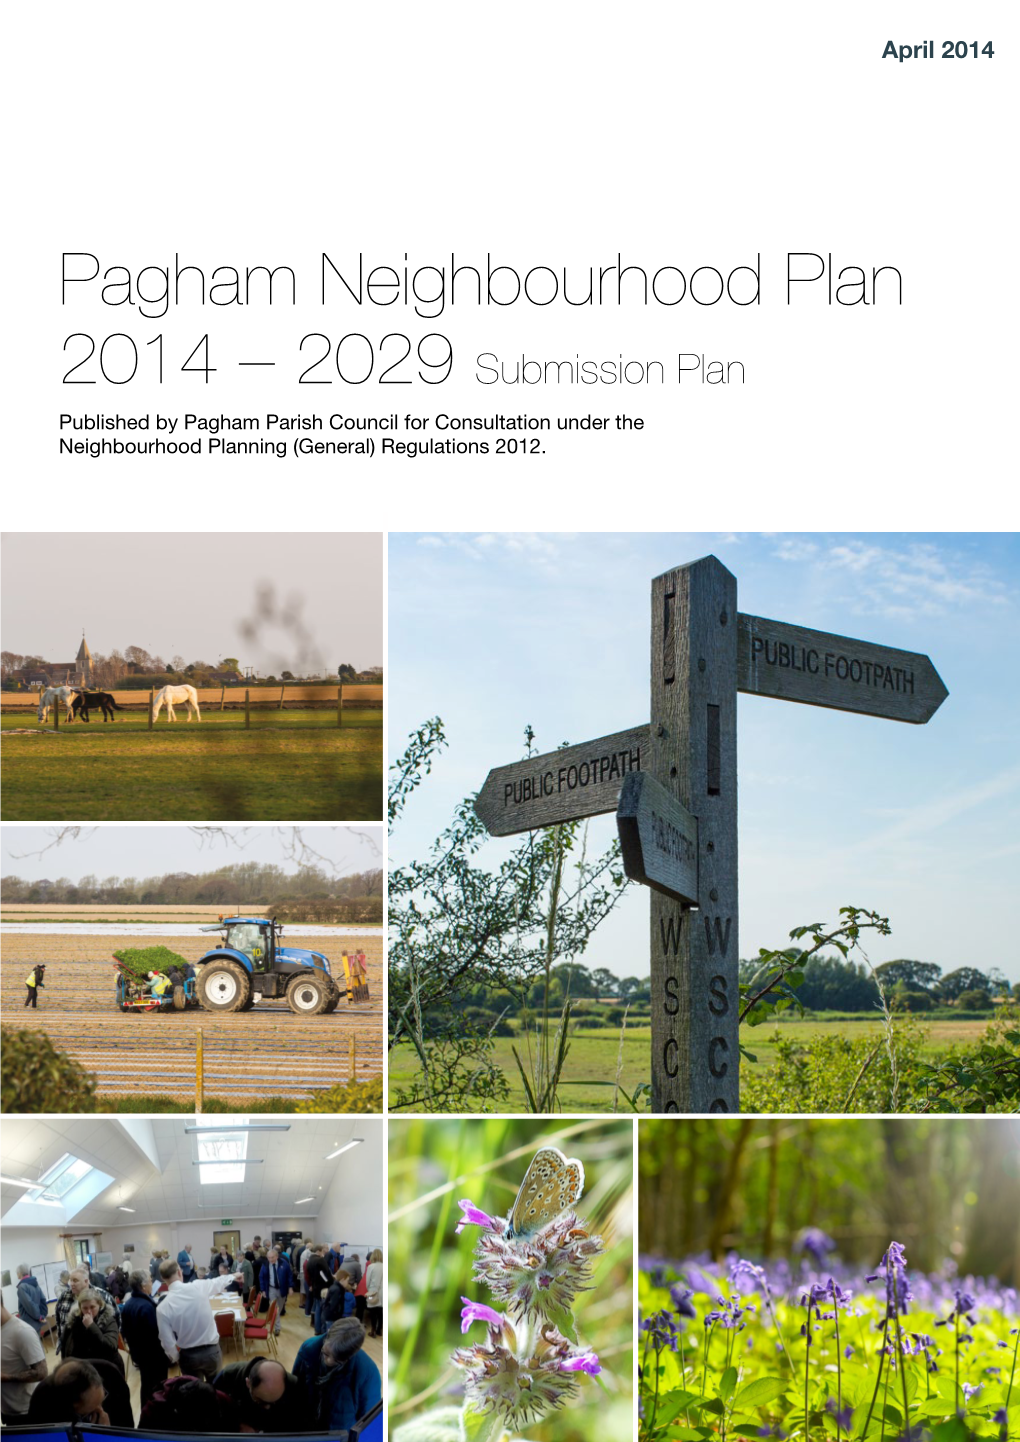 Pagham Neighbourhood Plan 2014 – 2029 Submission Plan Published by Pagham Parish Council for Consultation Under the Neighbourhood Planning (General) Regulations 2012